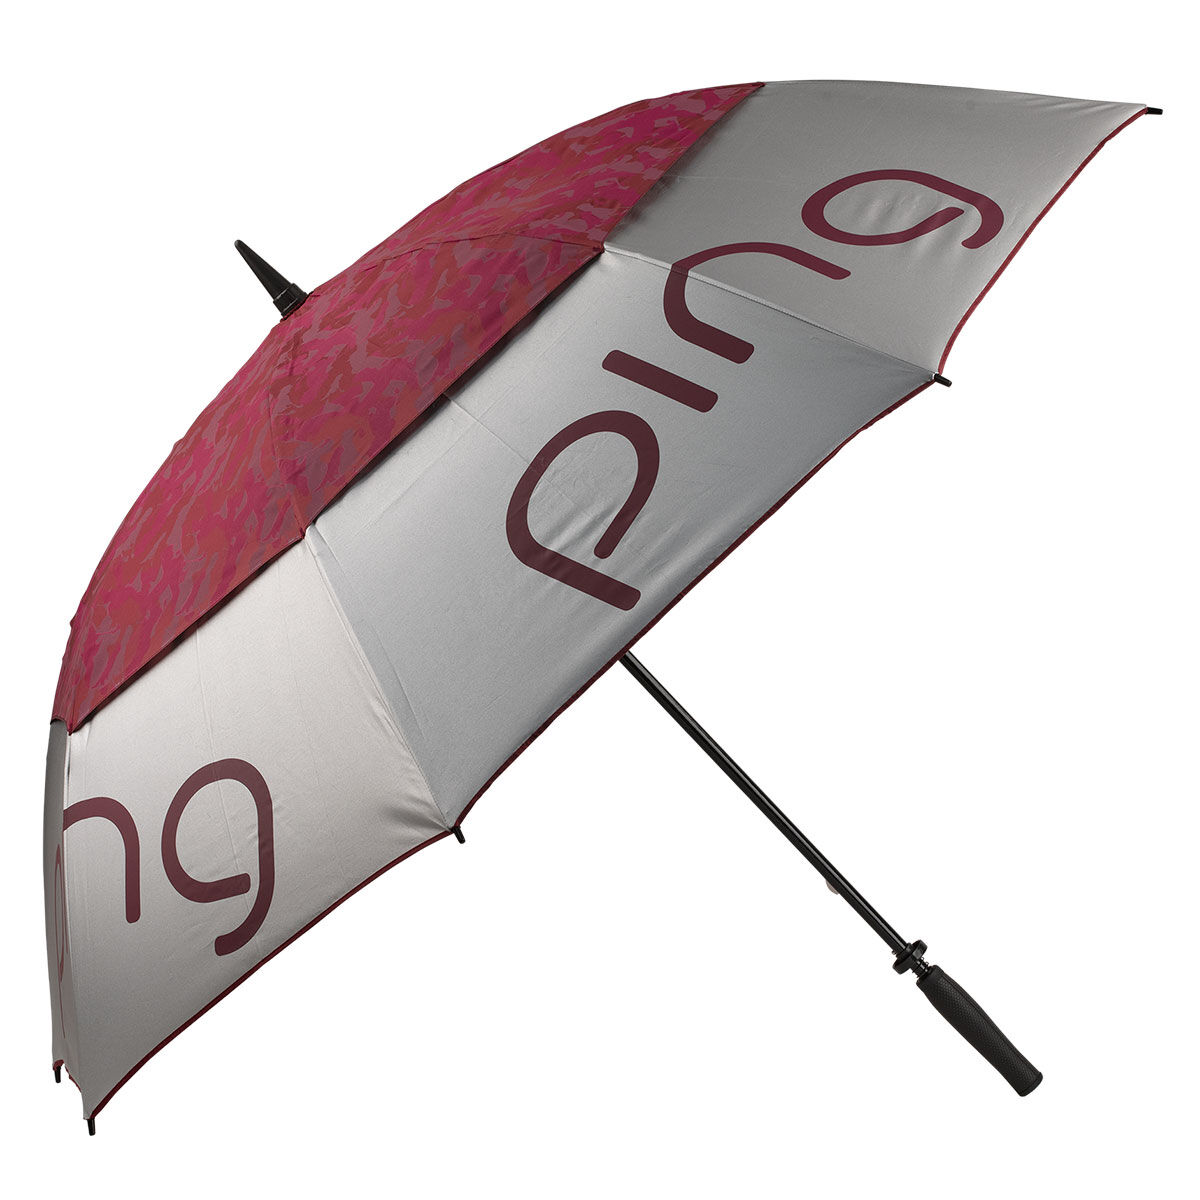 Ping Silver and Dark Red Umbrella, Size: 62" | American Golf